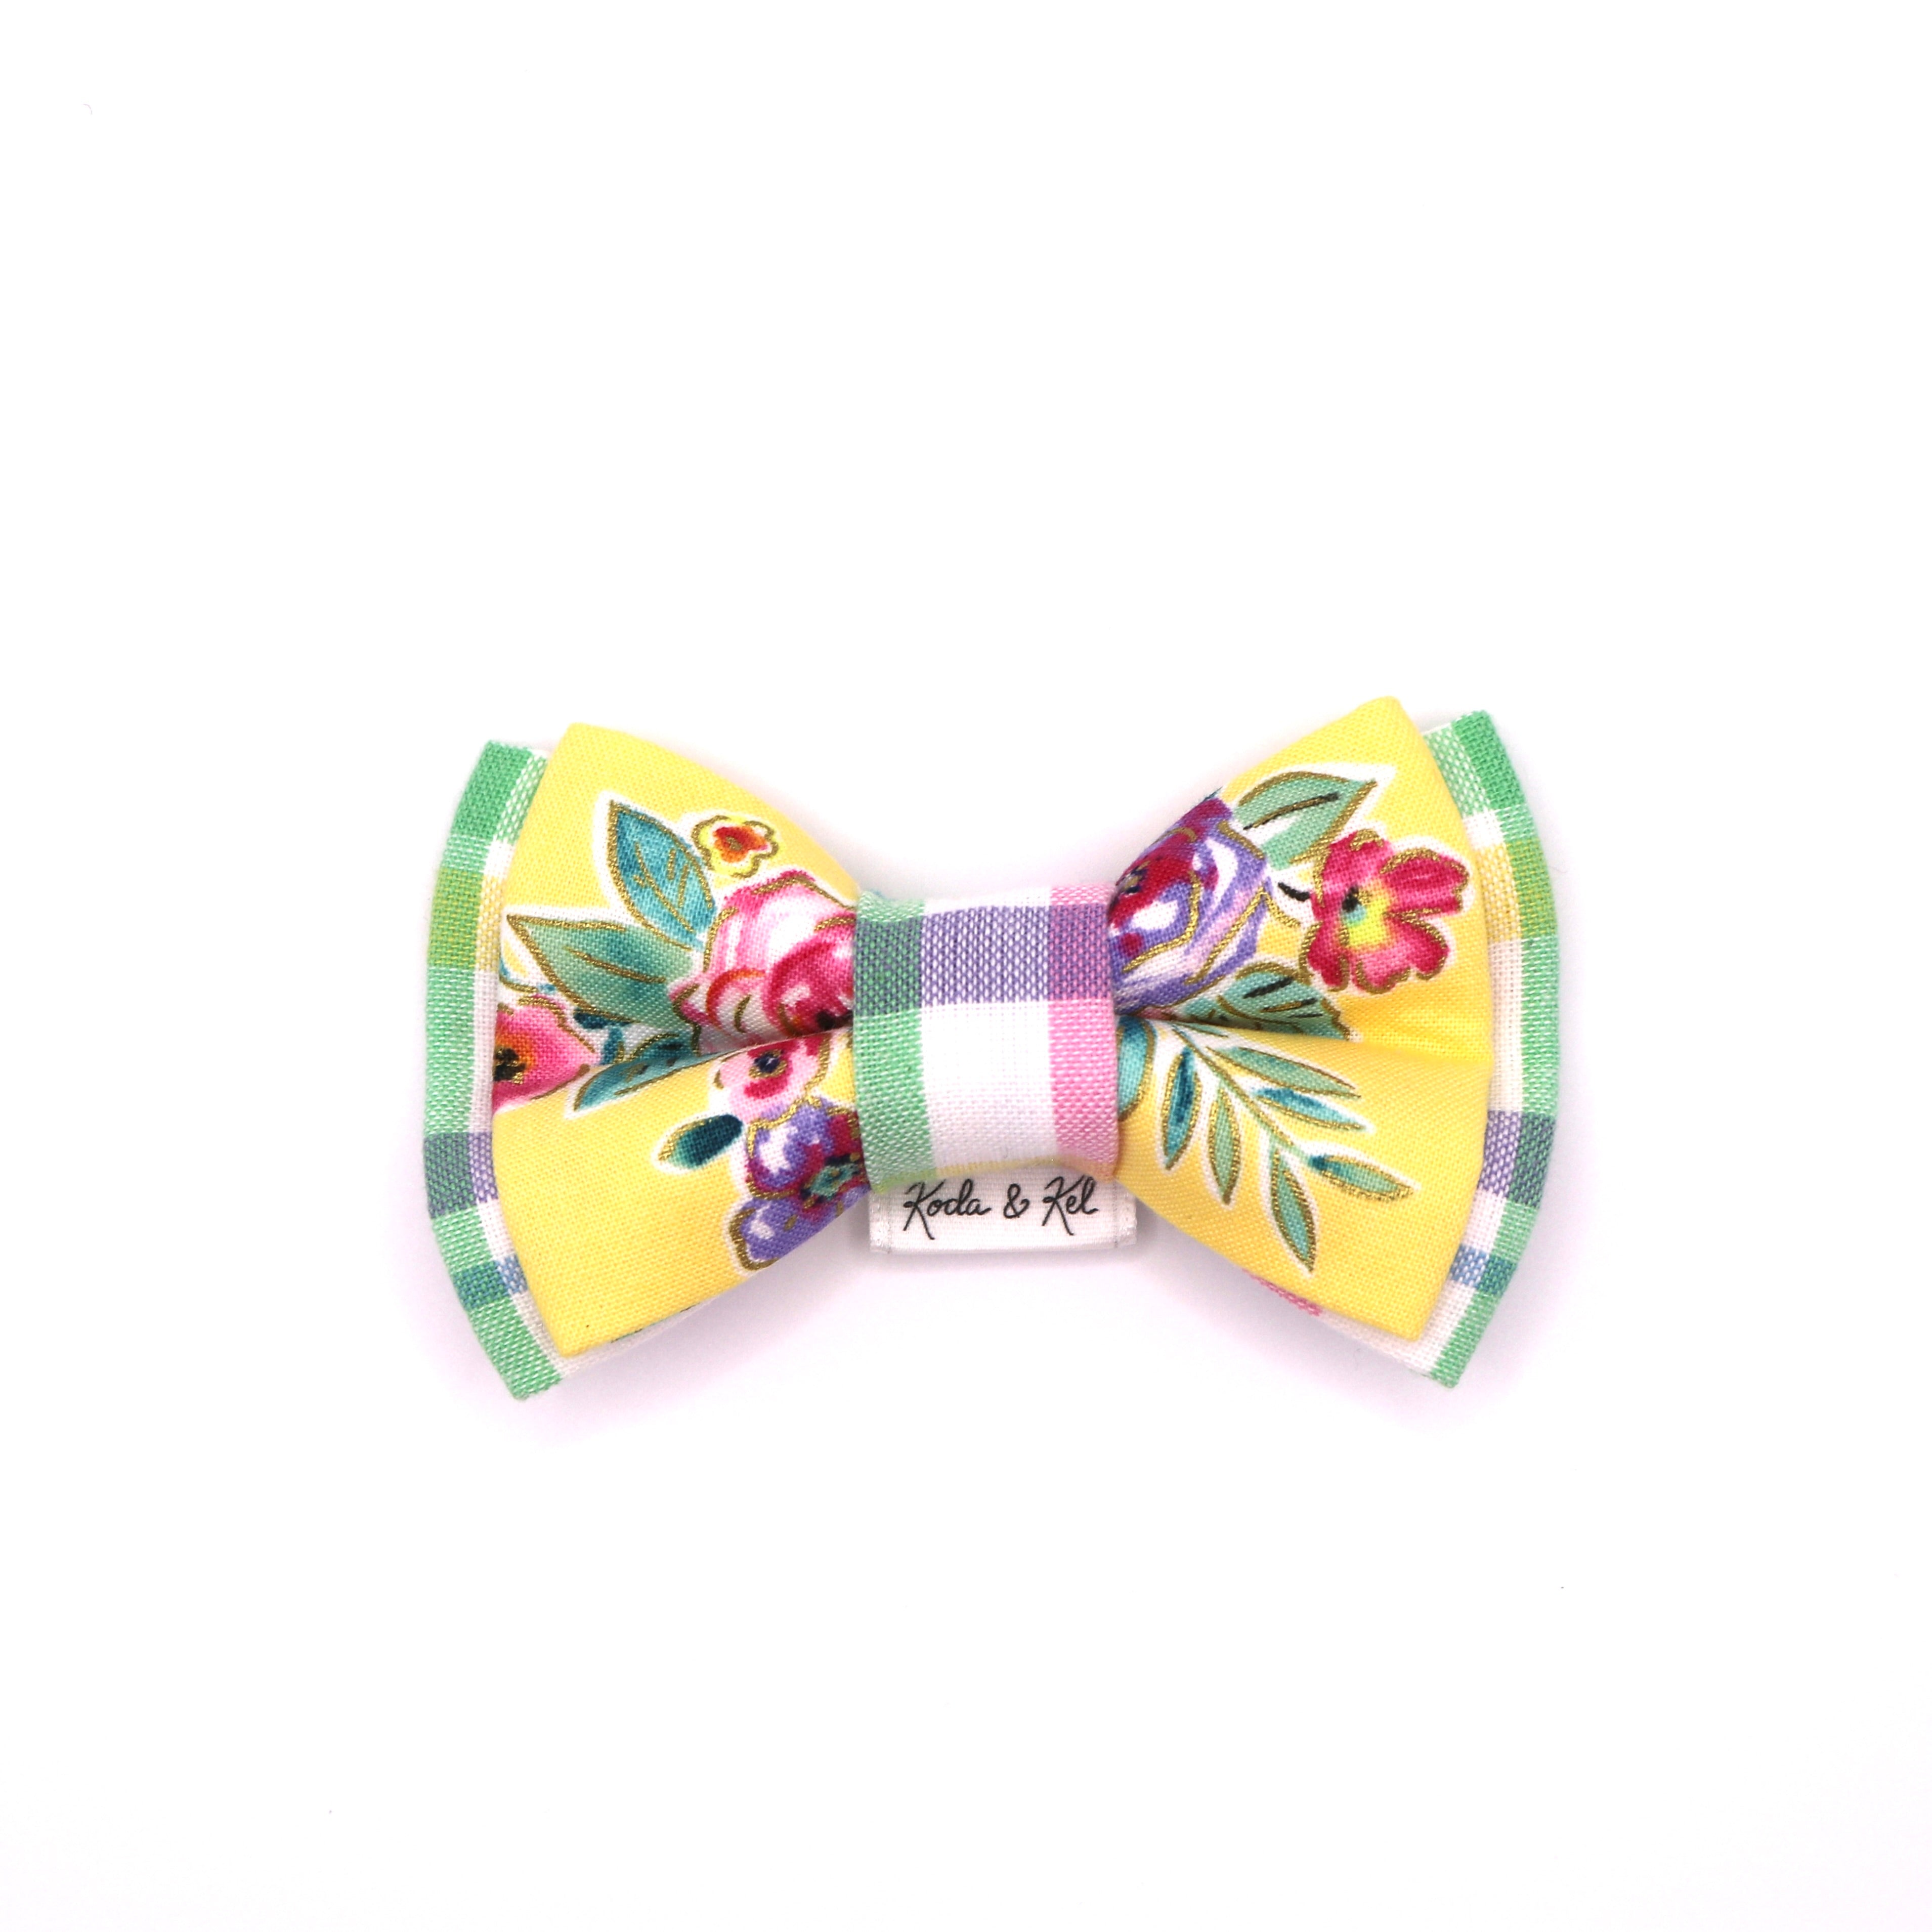 Fresh Blooms Bow Tie